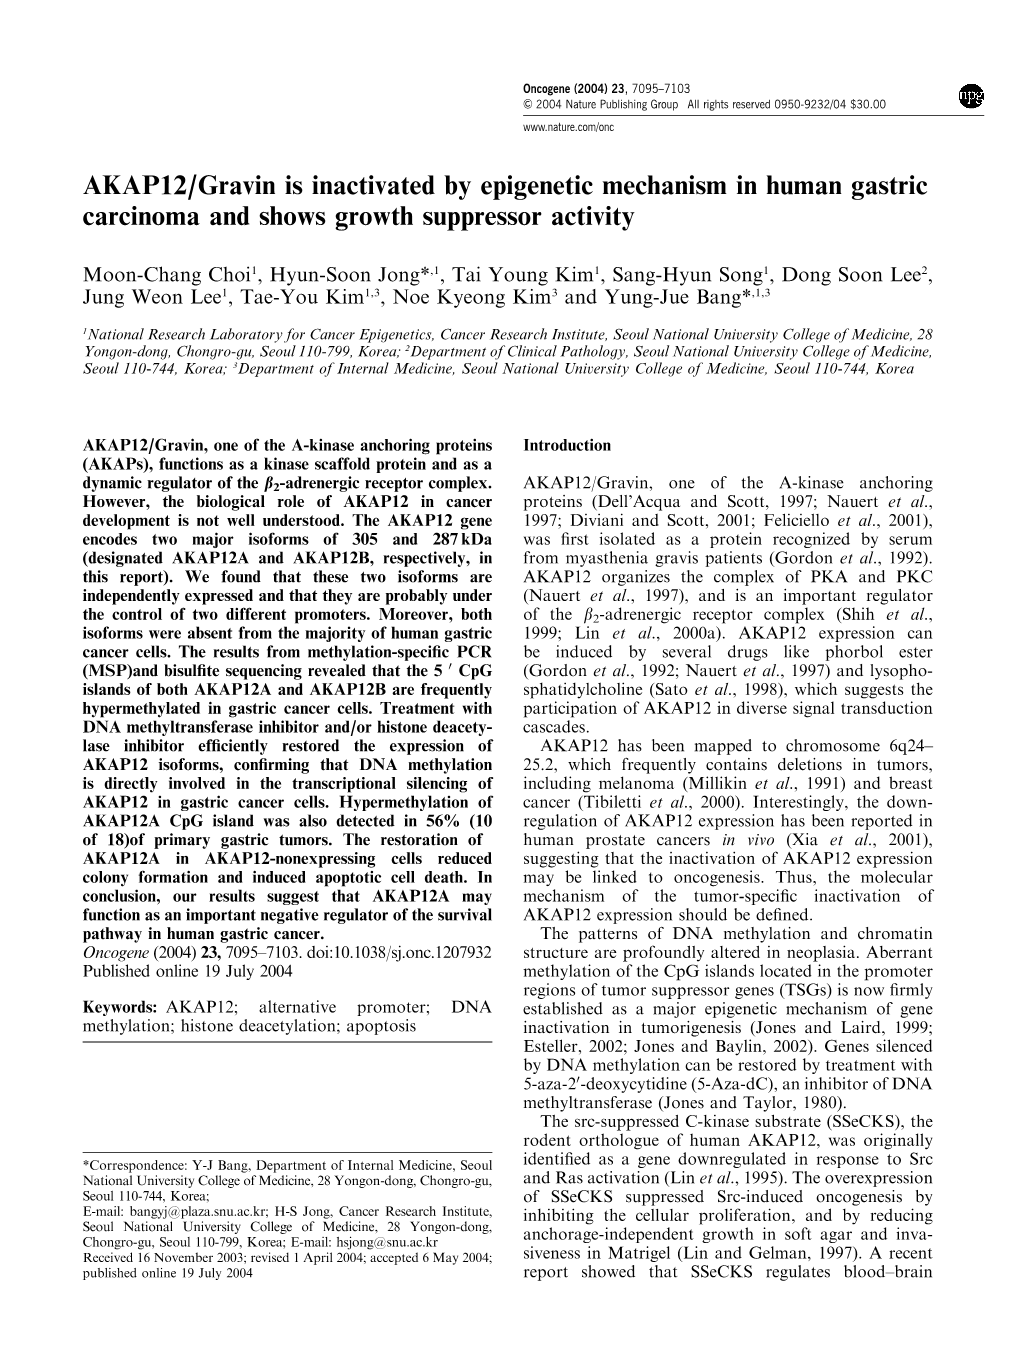 AKAP12/Gravin Is Inactivated by Epigenetic Mechanism in Human Gastric Carcinoma and Shows Growth Suppressor Activity